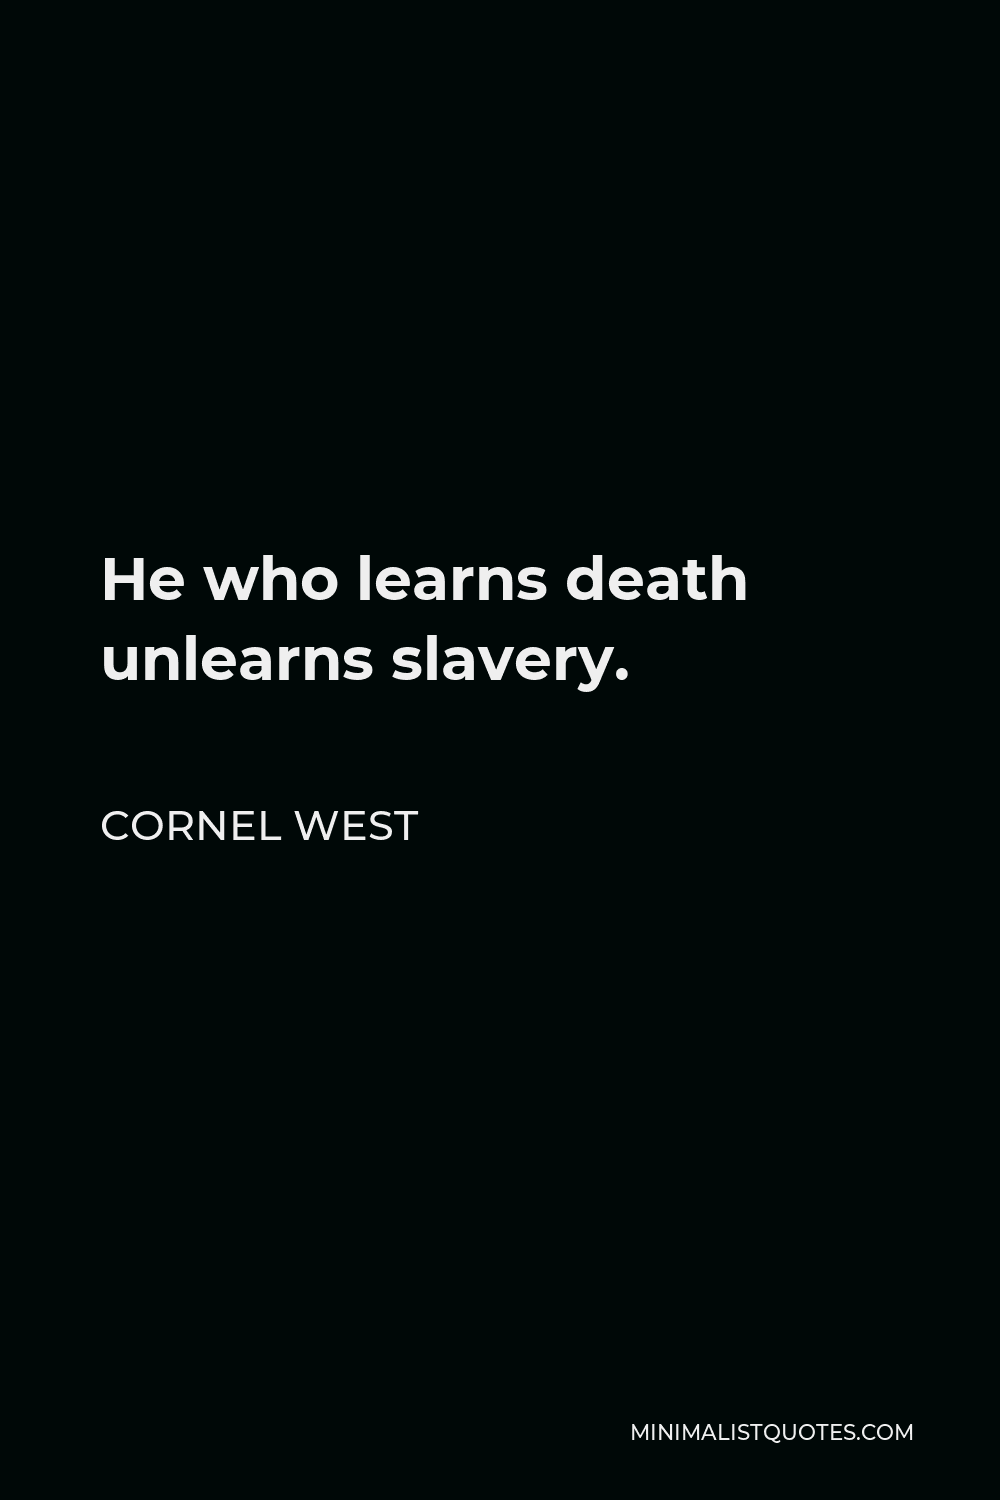 Cornel West Quote - He who learns death unlearns slavery.